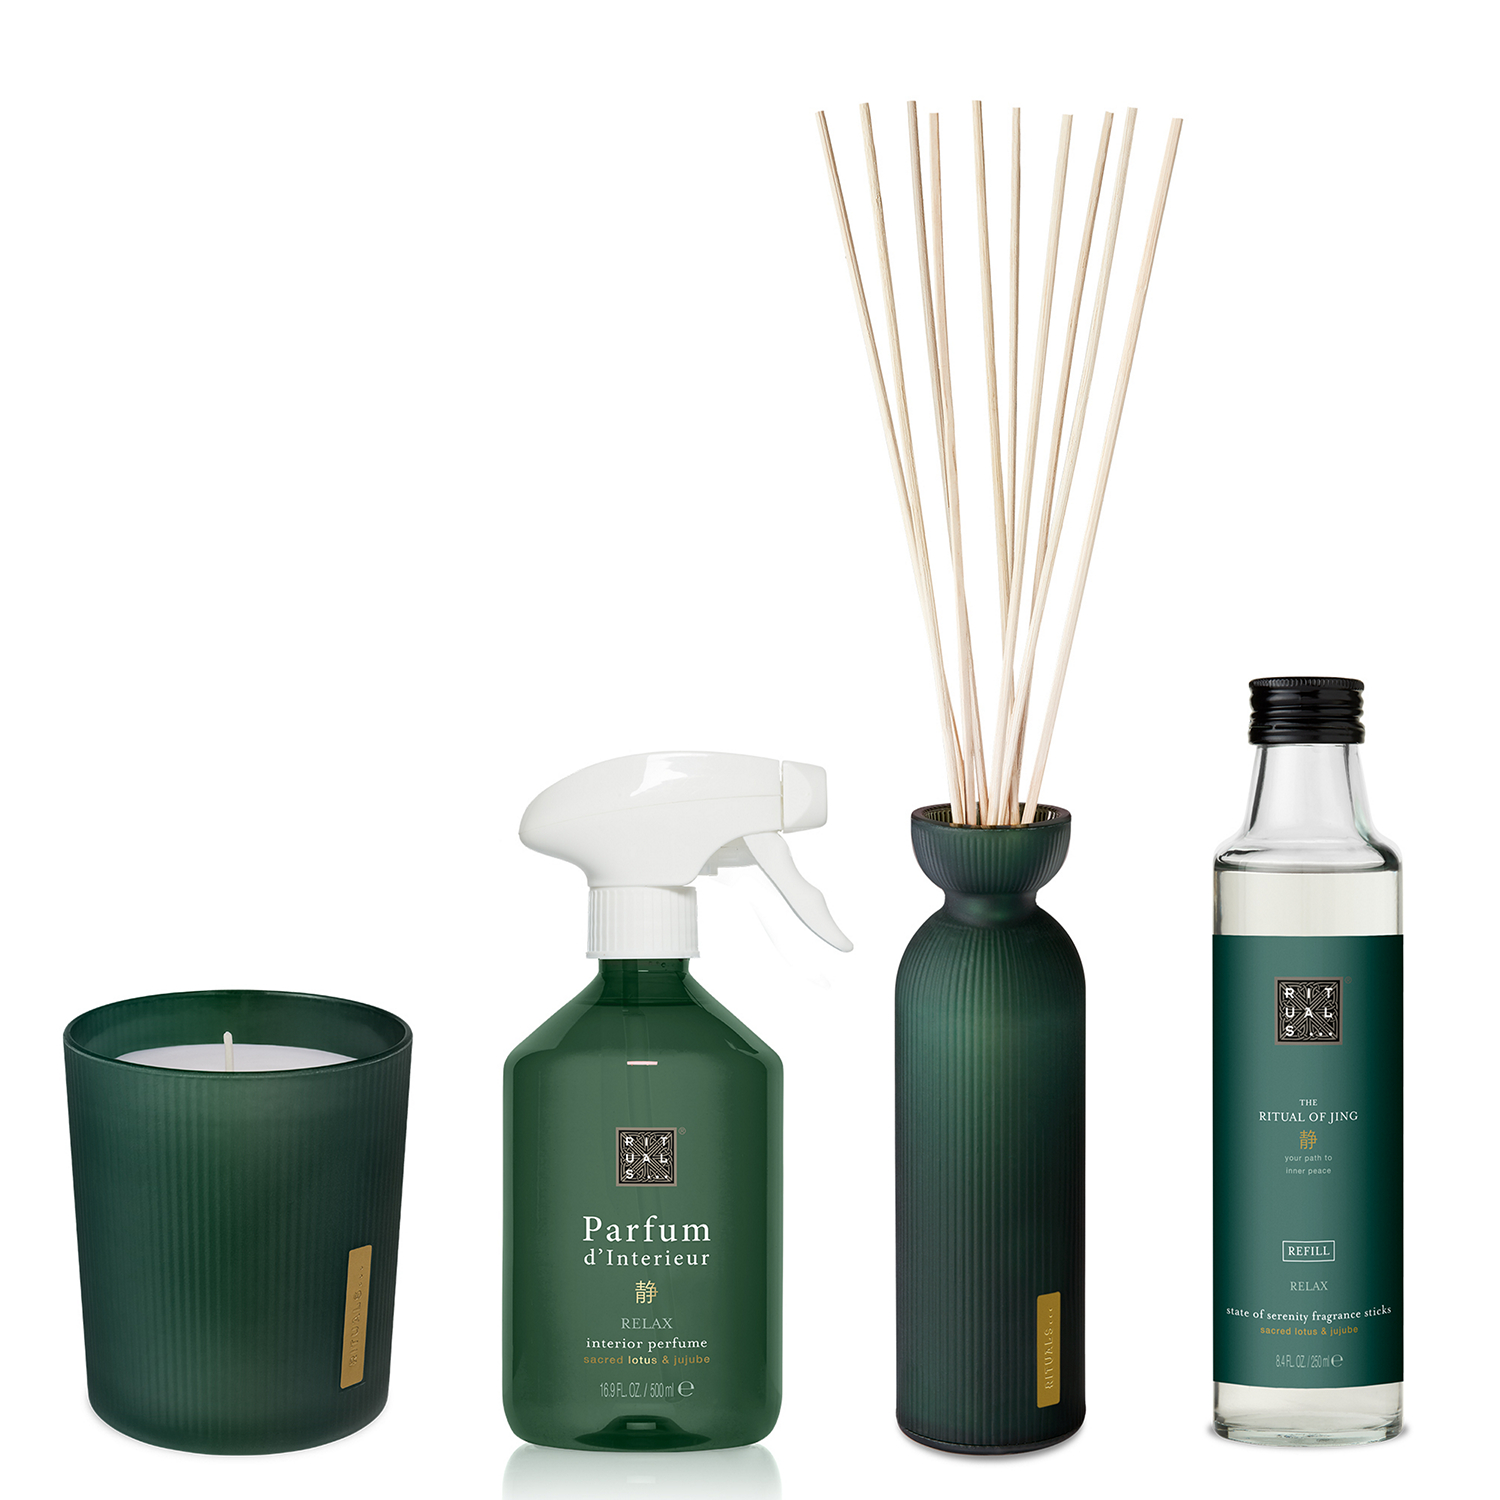 RITUALS The Ritual of Jing Home Fragrance Collection